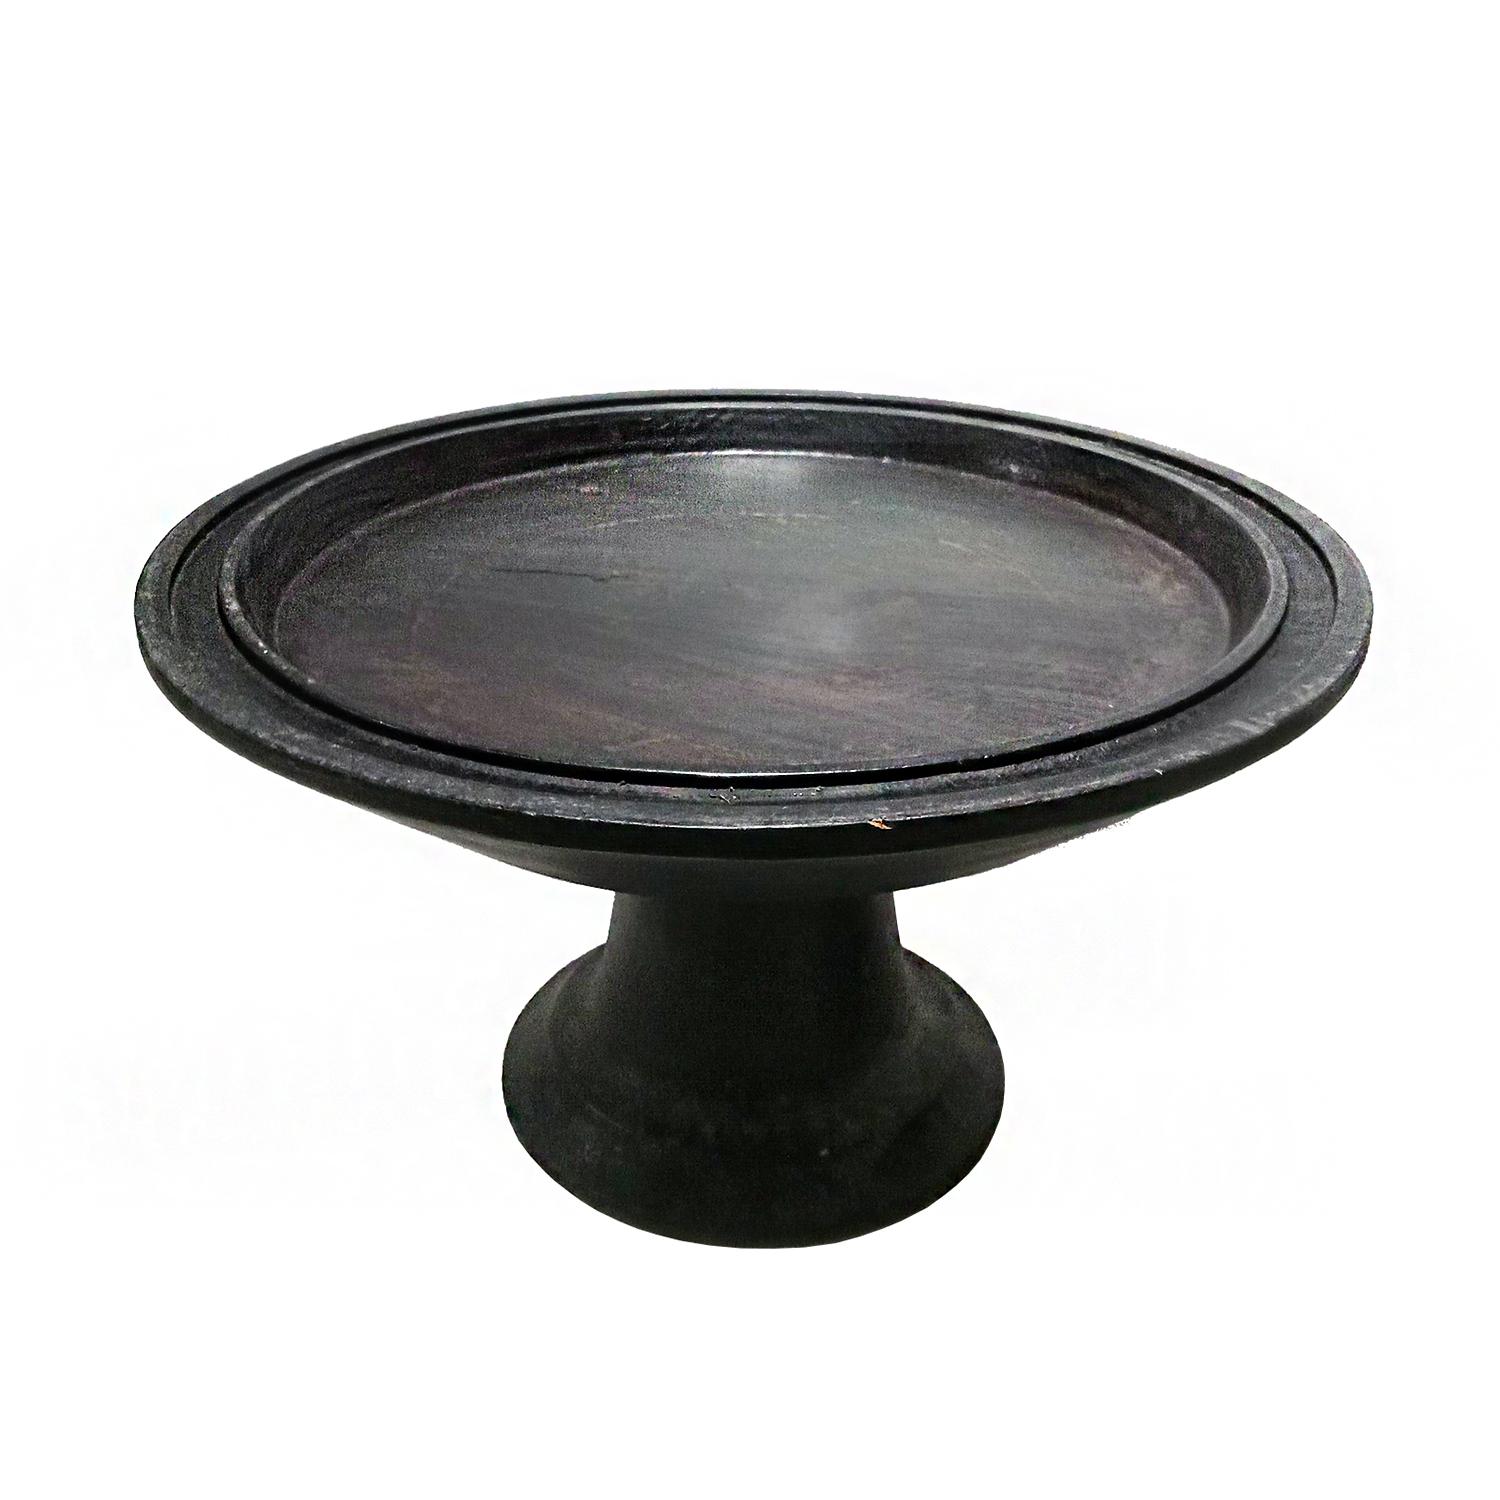 Late 20th Century Covered Pedestal Serving Tray